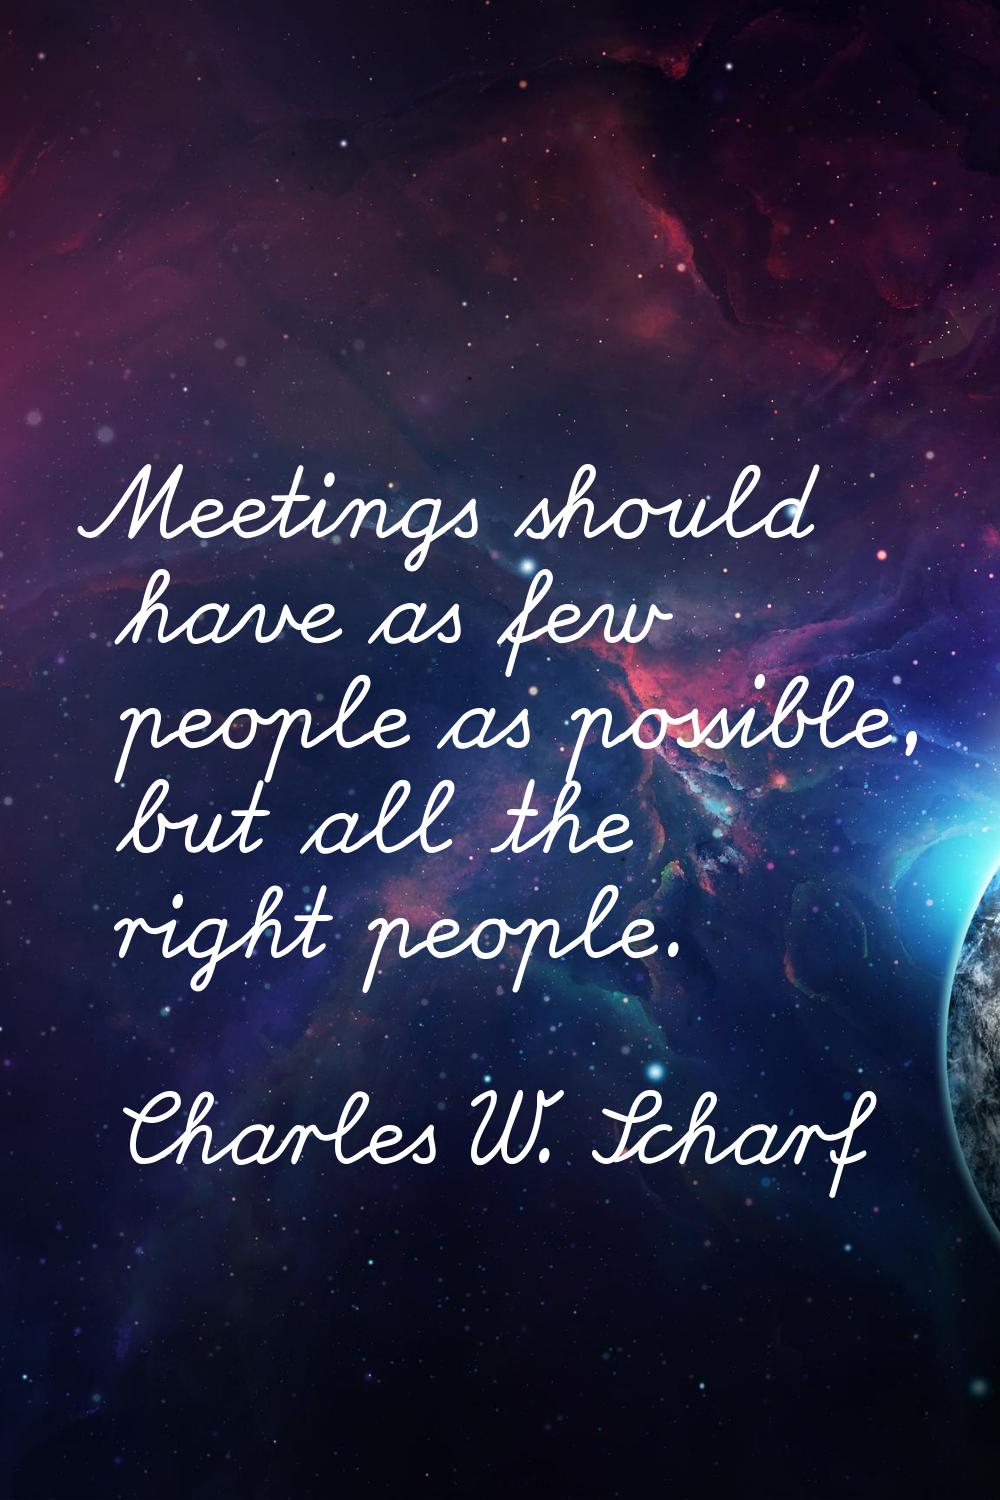 Meetings should have as few people as possible, but all the right people.